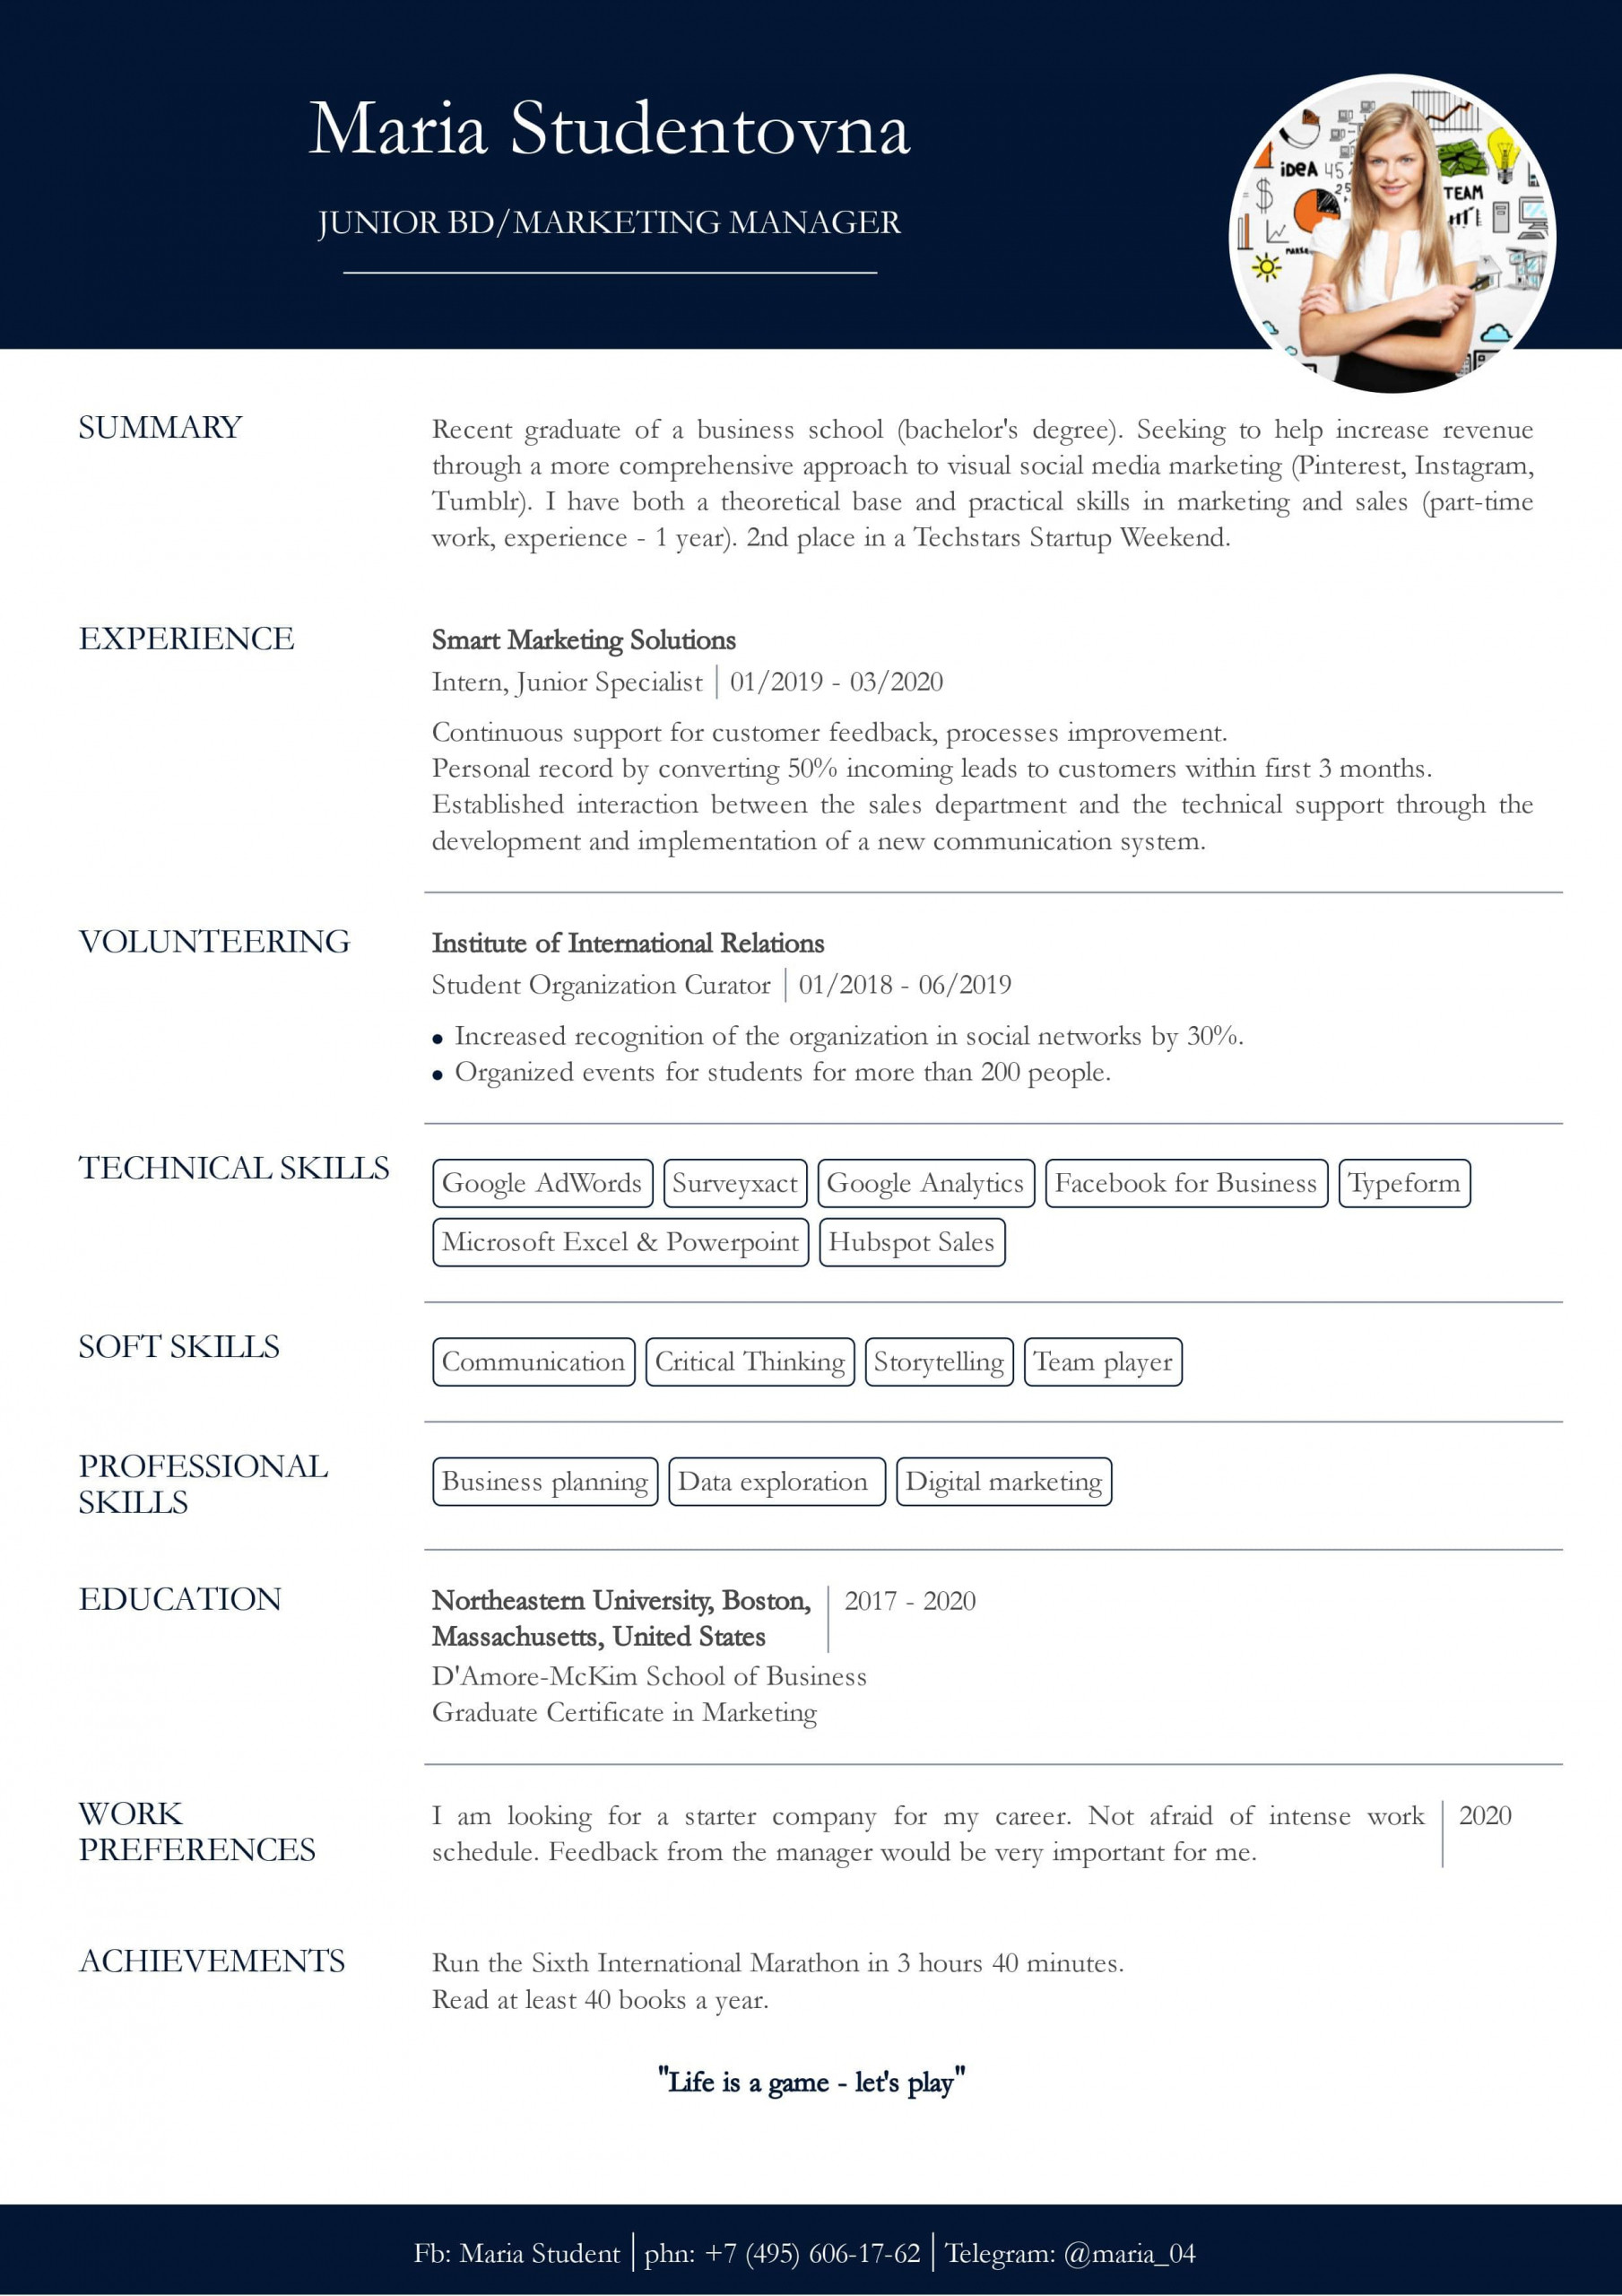 Sample Resume for It Students with No Experience Resume with No Work Experience. Sample for Students. – Cv2you Blog